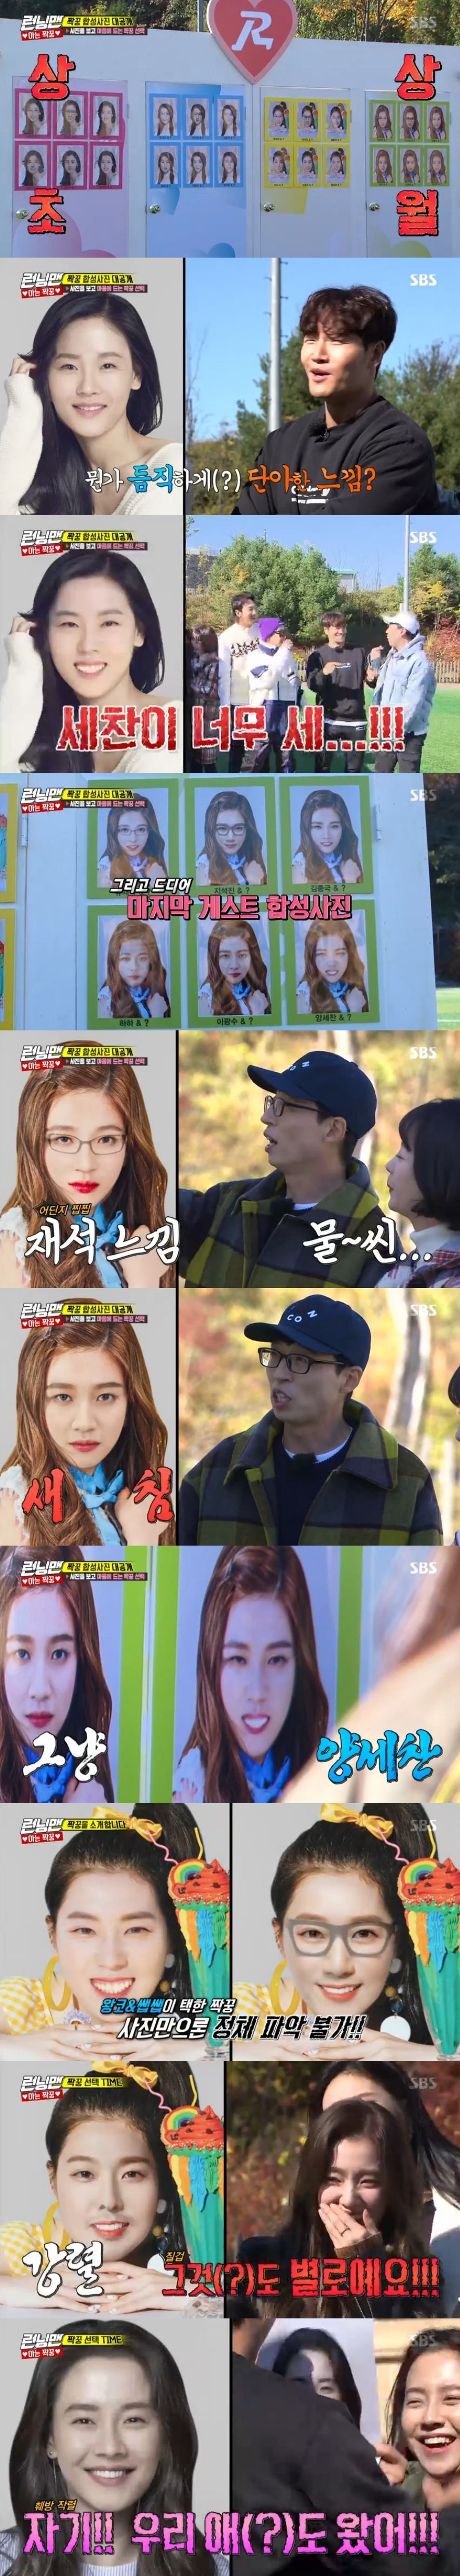 (Seoul =) = Irene and Joy, Seol In-ah and Kang Han Na caused a big smile with photos of the men in the Running Man and the combination of previous-class genes.SBS Running Man, which was broadcasted at 4:50 pm on the 18th, was a guest with the title Perfect Other, Irene, Joy, Kang Na and Seol In-ah.Before the four people appeared on the day, a picture of a face synthesis with the male members of Running Man was first released.All four guests are people with beautiful looks, but the results combined with the genes of the Running Man members were raging.Especially, the face combined with Yang Se-chan was shocking because Yang Se-chans oral structure was ridiculous even if it was combined with any face.Yang said, I am so sorry for the performers. Song Ji-hyo blocked his mouth and laughed, surprised that the gene is really strong.In addition, Haha was synthesized with a beard, and it met with all faces and turned into a South image, making everyone laugh.The performers were shocked to see the shocking photos synthesized with Yang Se-chan, Haha, and Seok-jin.Irene laughed when she saw the synthesis with Ji Seok-jin and said, I hate it.On the other hand, the face synthesized with Kim Jong Kook boasted beautiful beauty and bought envy of everyone. So, it was very popular such as Seo In-ah, Song Ji-hyo, Jeon So-min and Kang Han Na to be paired with Kim Jong Kook.In the end, Seol In-ah, who showed charm, took the match with Kim Jong-guk.